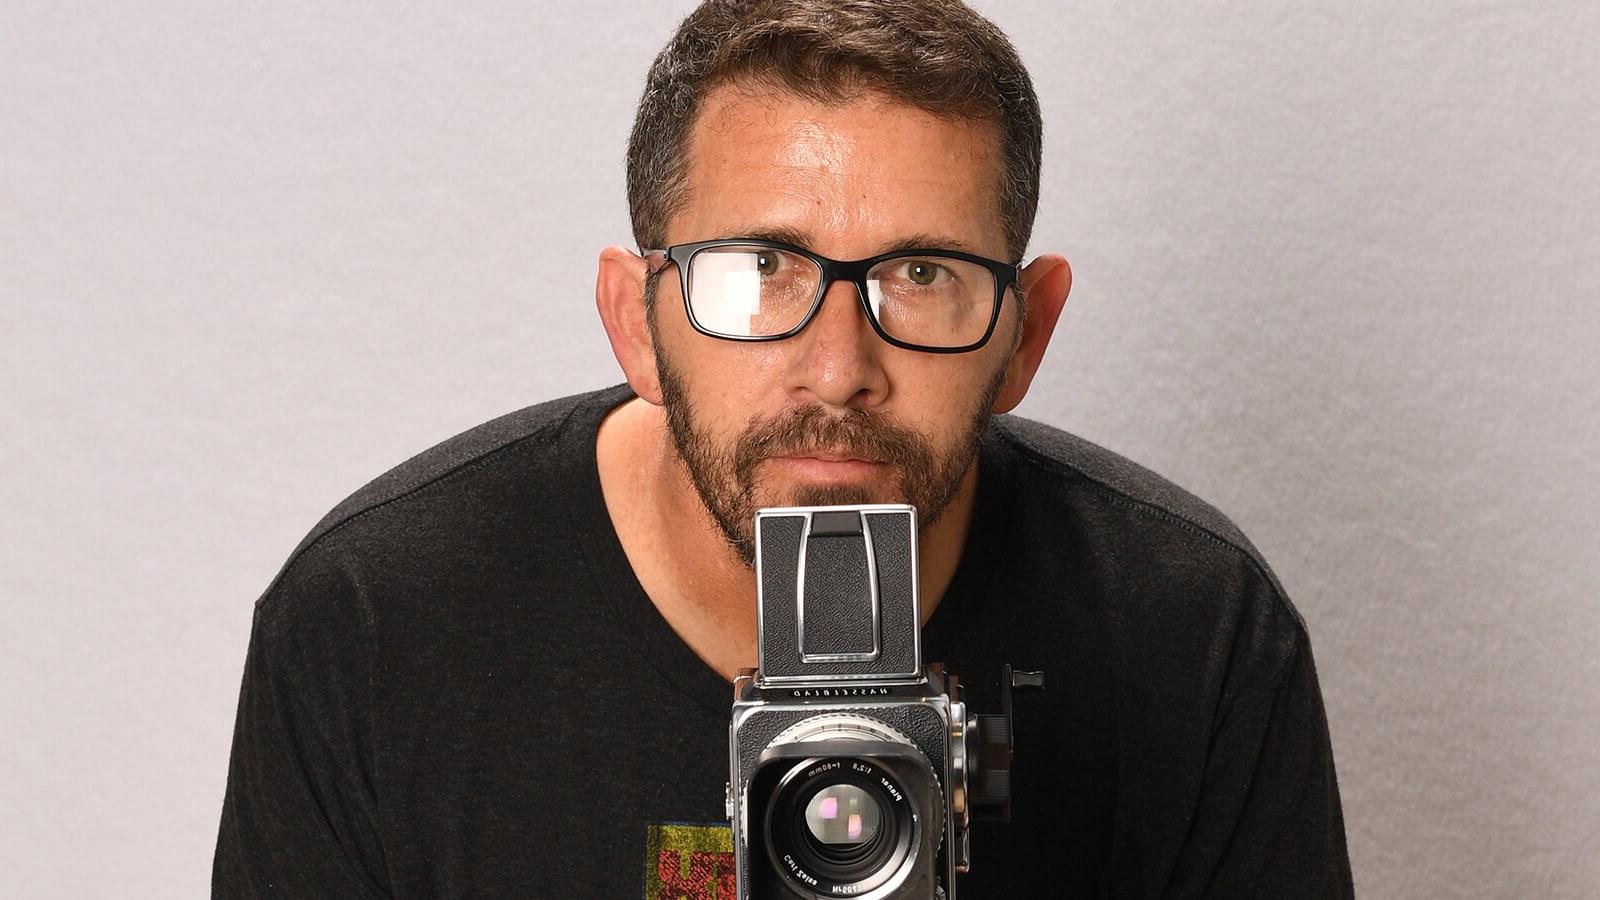 Sebastian Krys crouches behind a video camera. He is wearing black-rimmed eyeglasses and a black t-shirt with a logo on it.